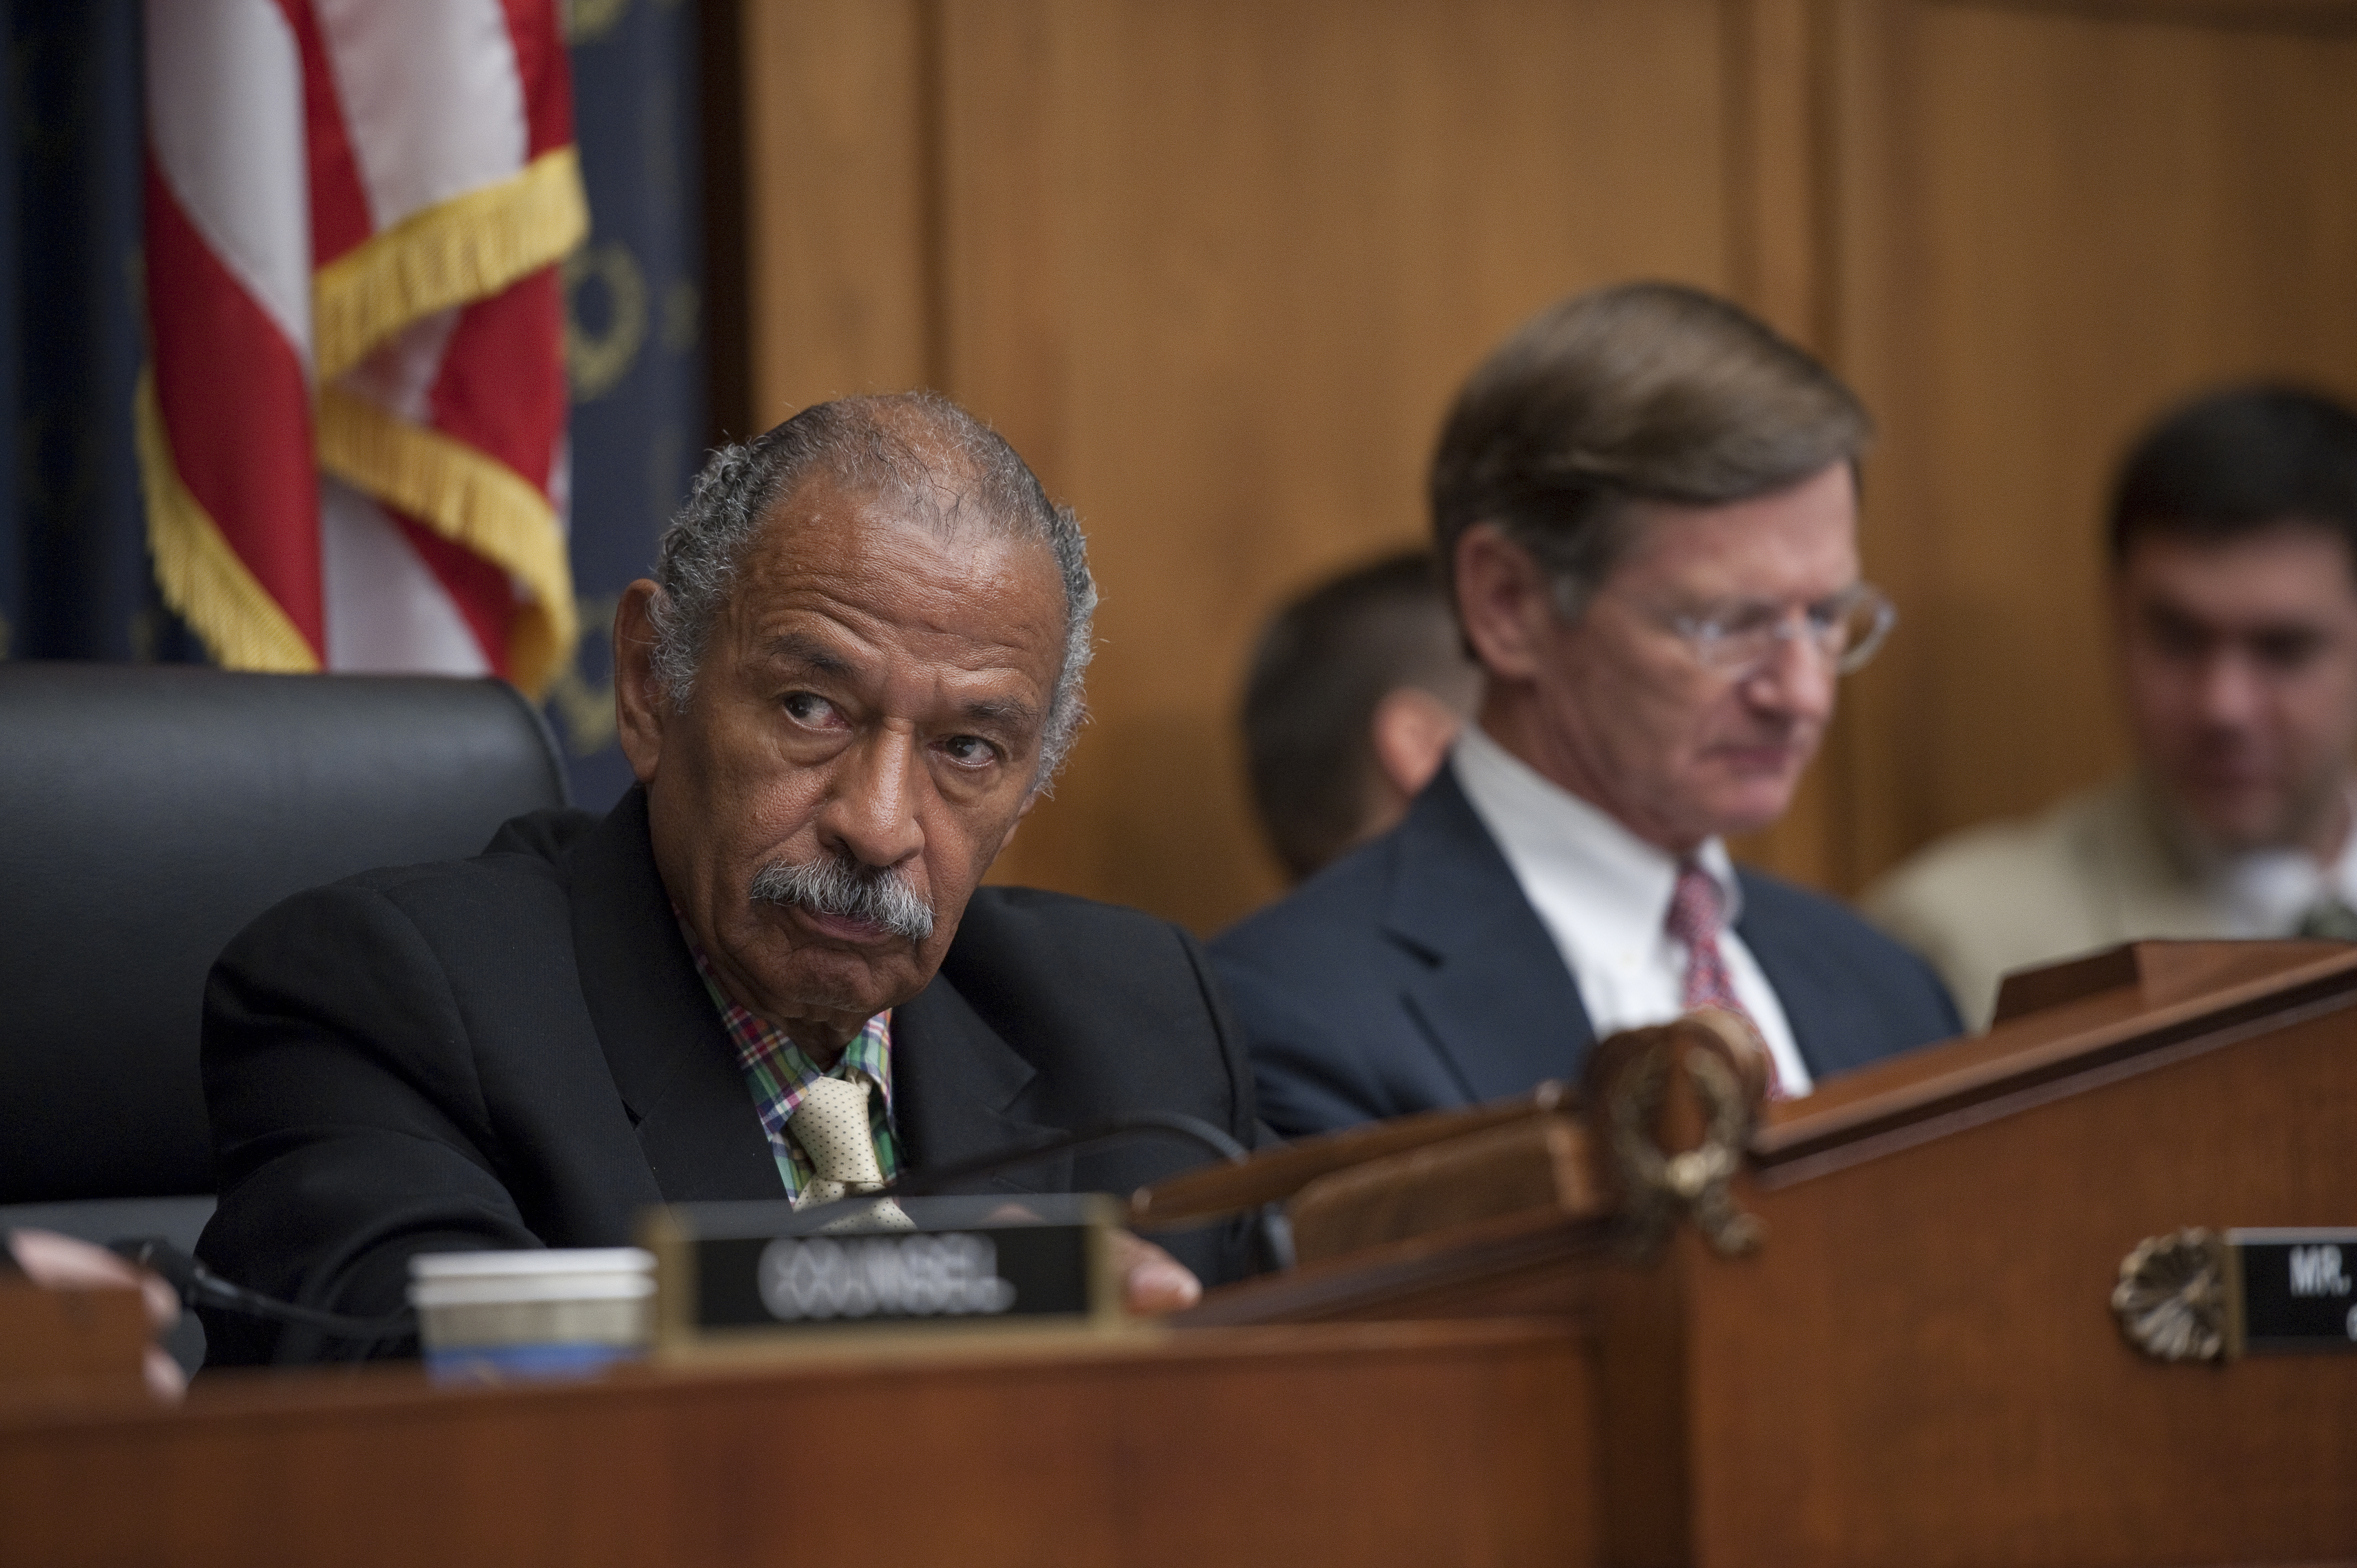 Rep. John Conyers (D-MI.) at a BP Oil Spill Victim Compensation committee hearing in Washington on July 21, 2010. (Douglas Graham—CQ-Roll Call,Inc.)